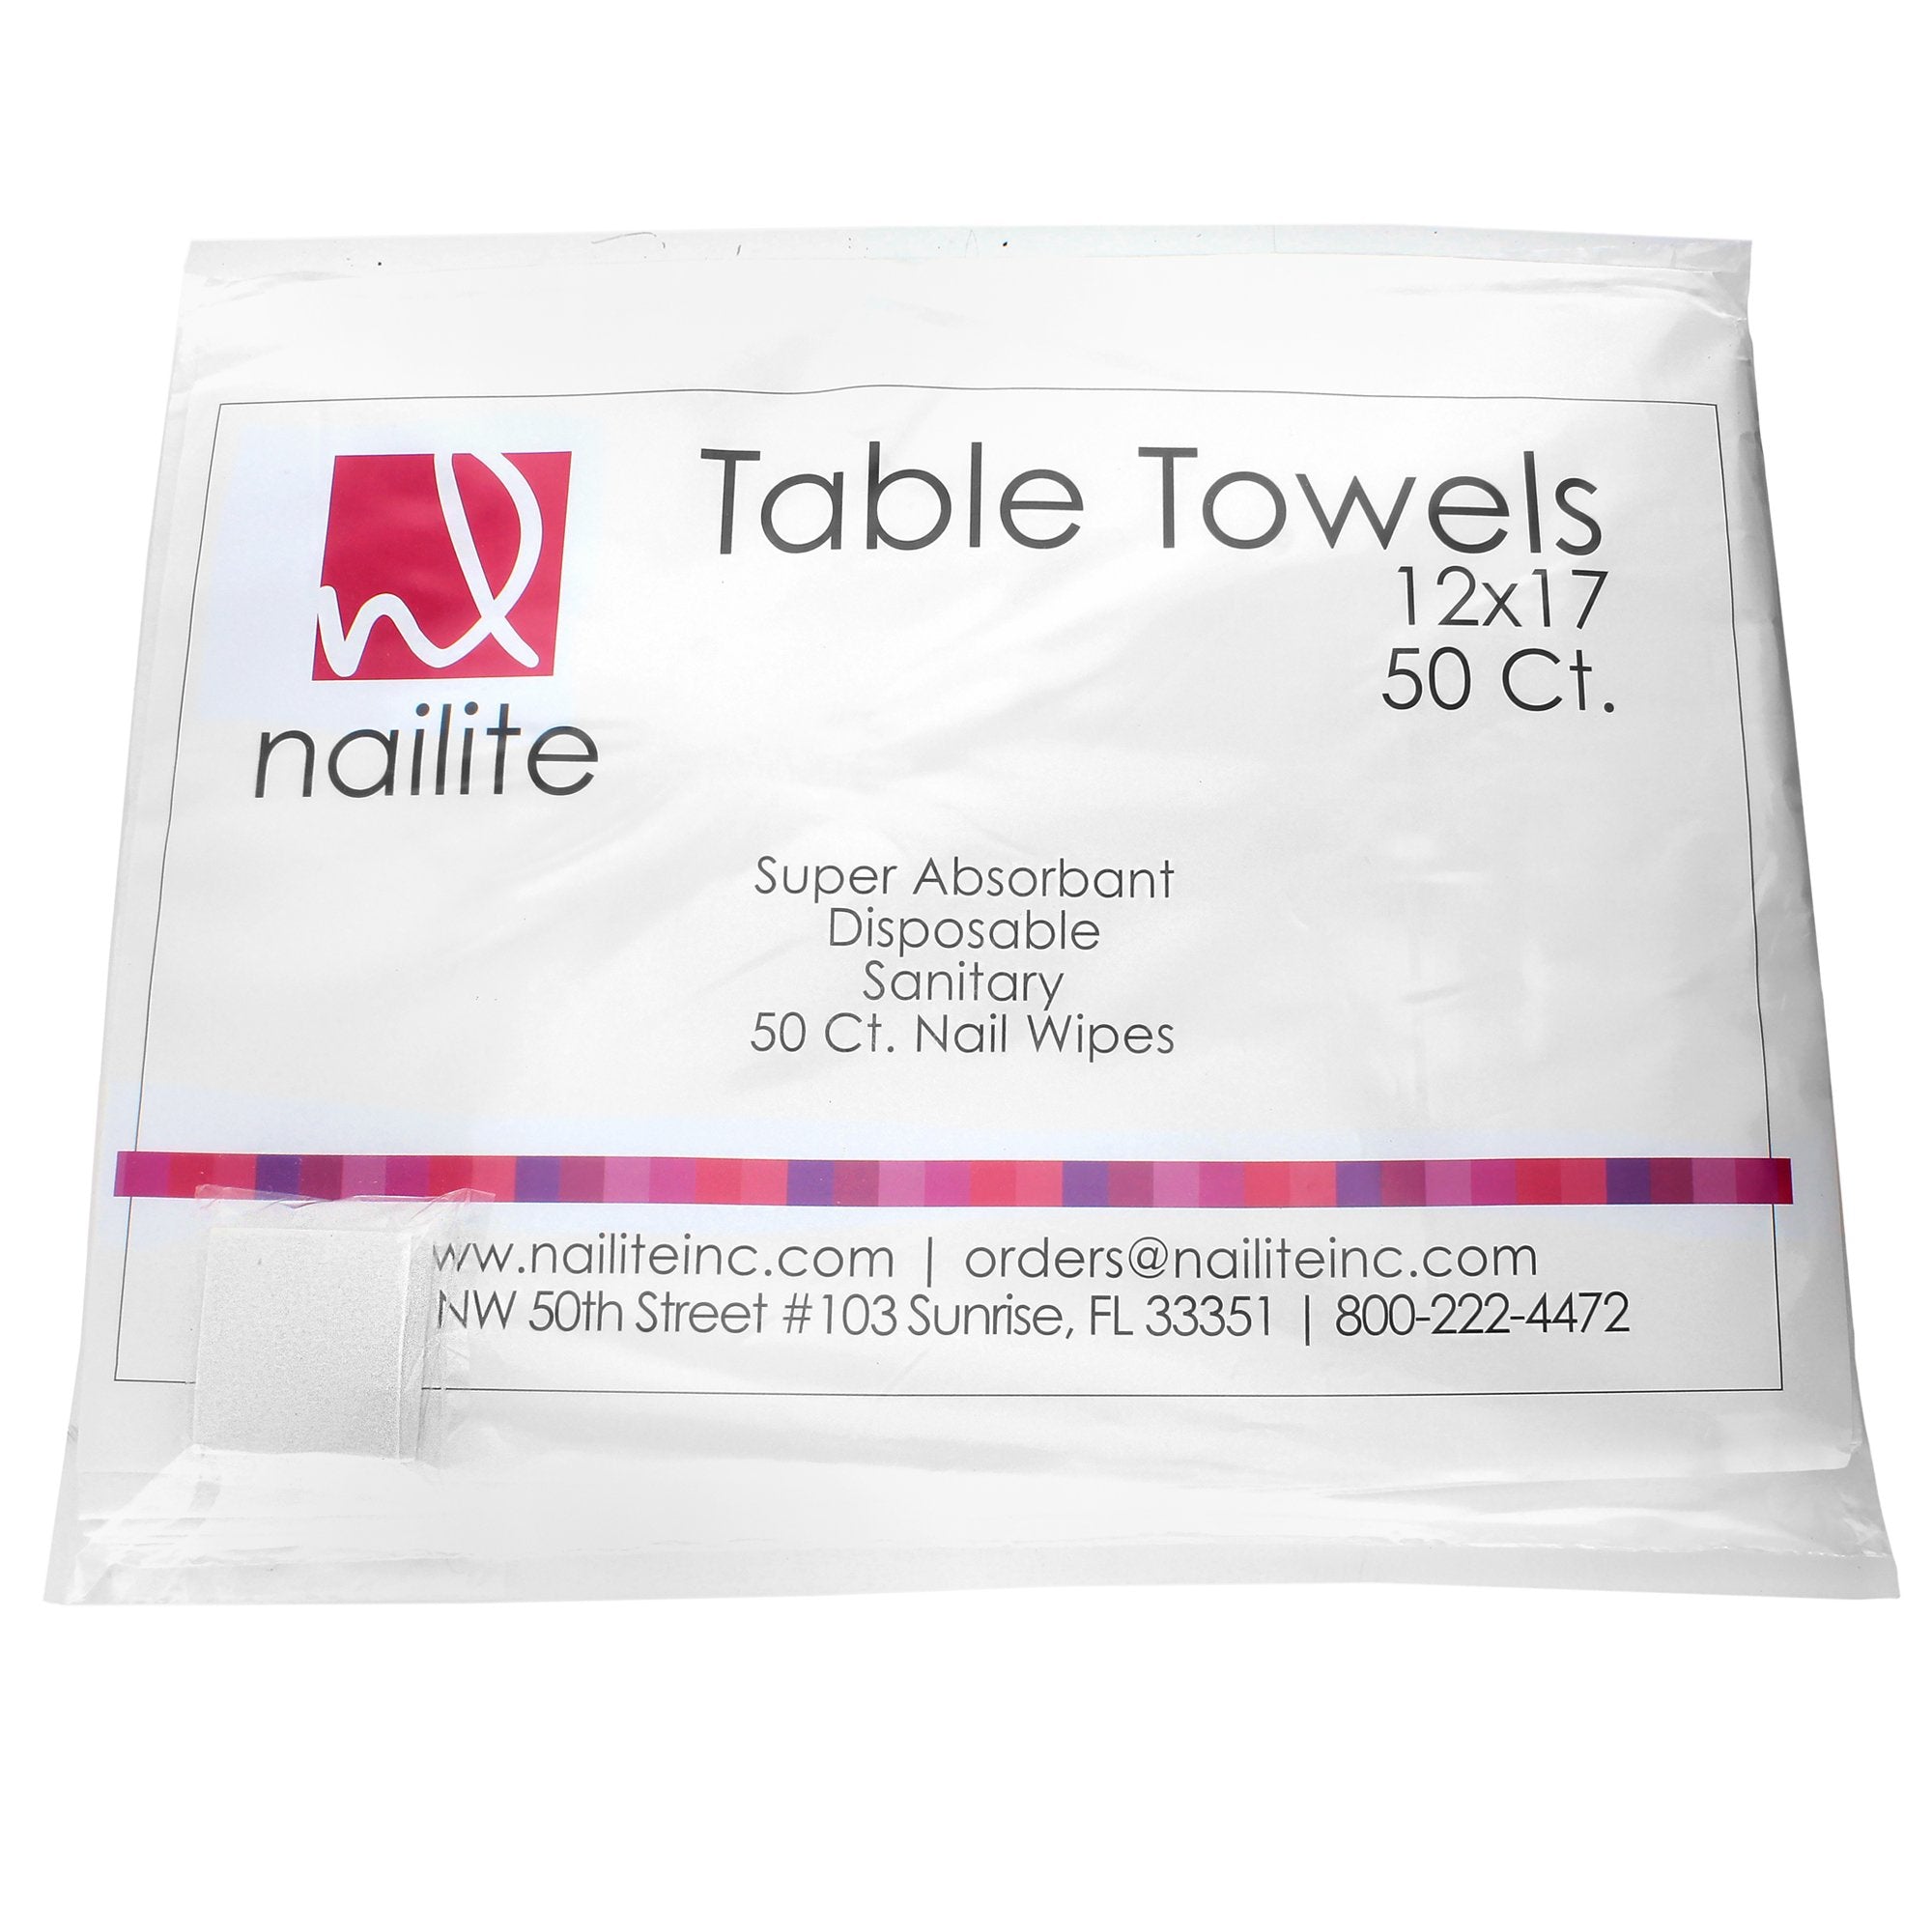 Nailite Table Towels with 50 FREE Nail Wipes